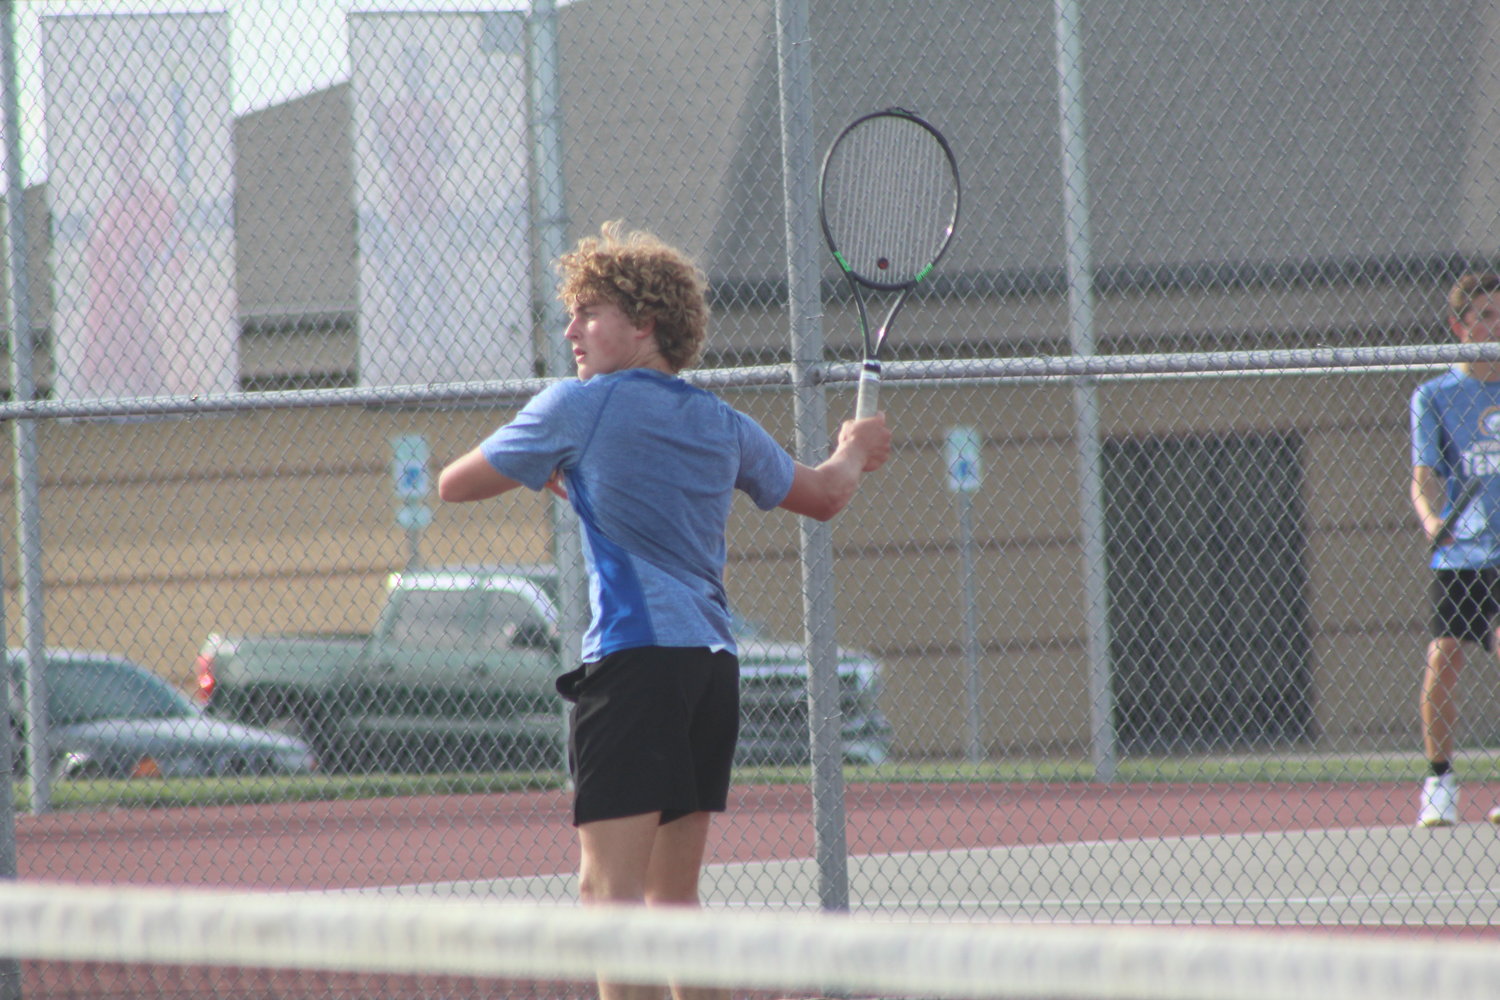 Wyatt Motz began the comeback for CHS as he defeated Southmont's Luke Tesmer in three sets.